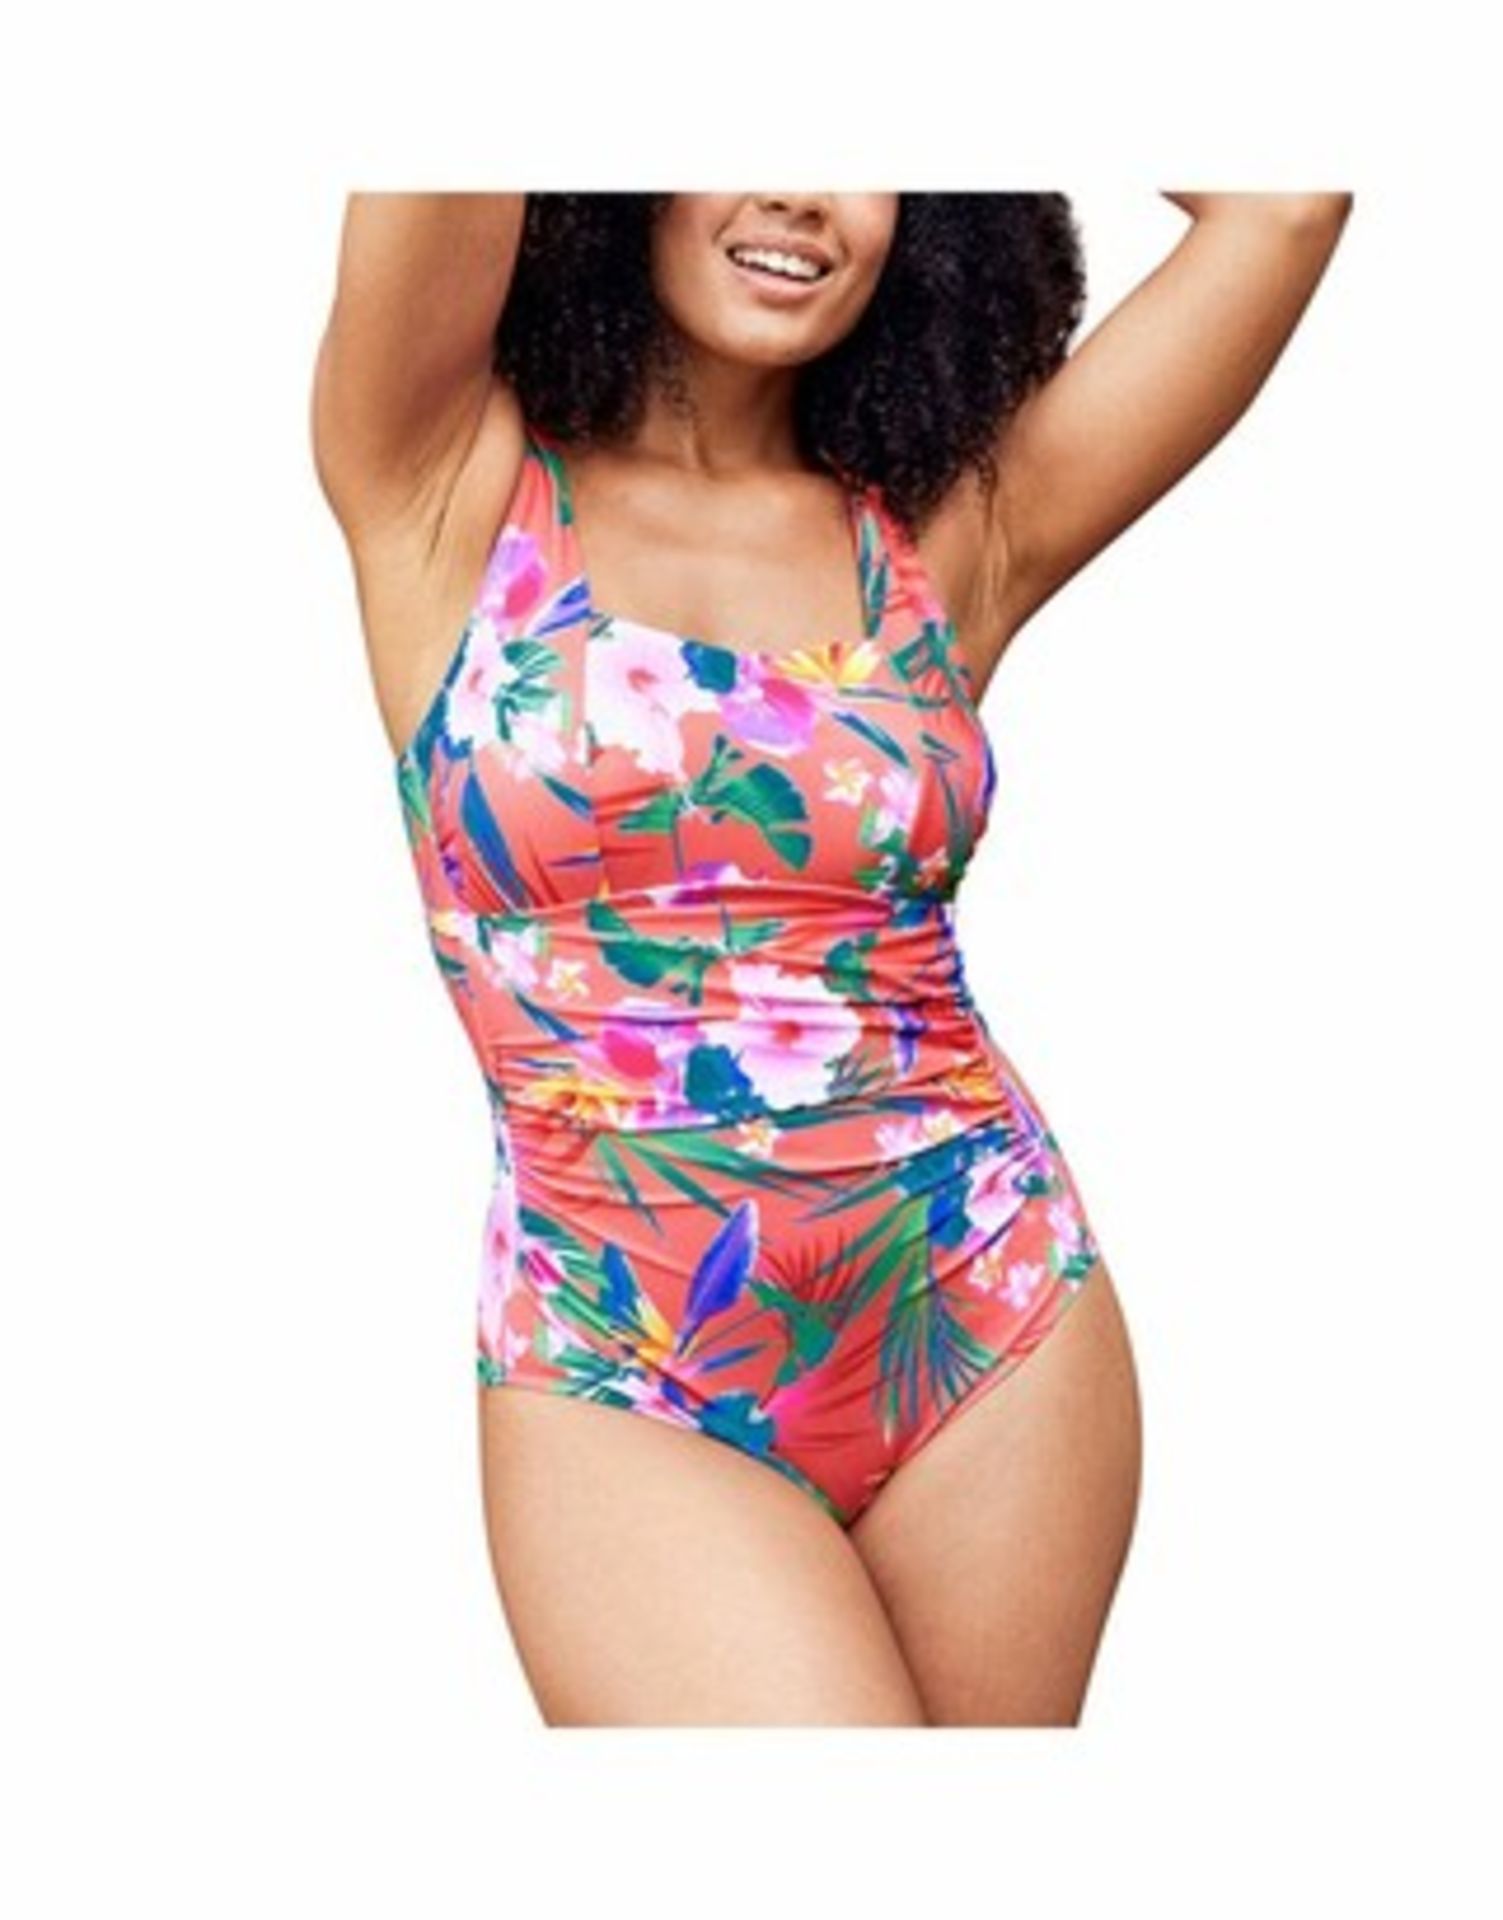 10 X BRAND NEW INDIVIDUALLY PACKAGED FIGLEAVES BORA BORA UNDERWIRED SQUARE NECK SWIMSUITS IN VARIOUS